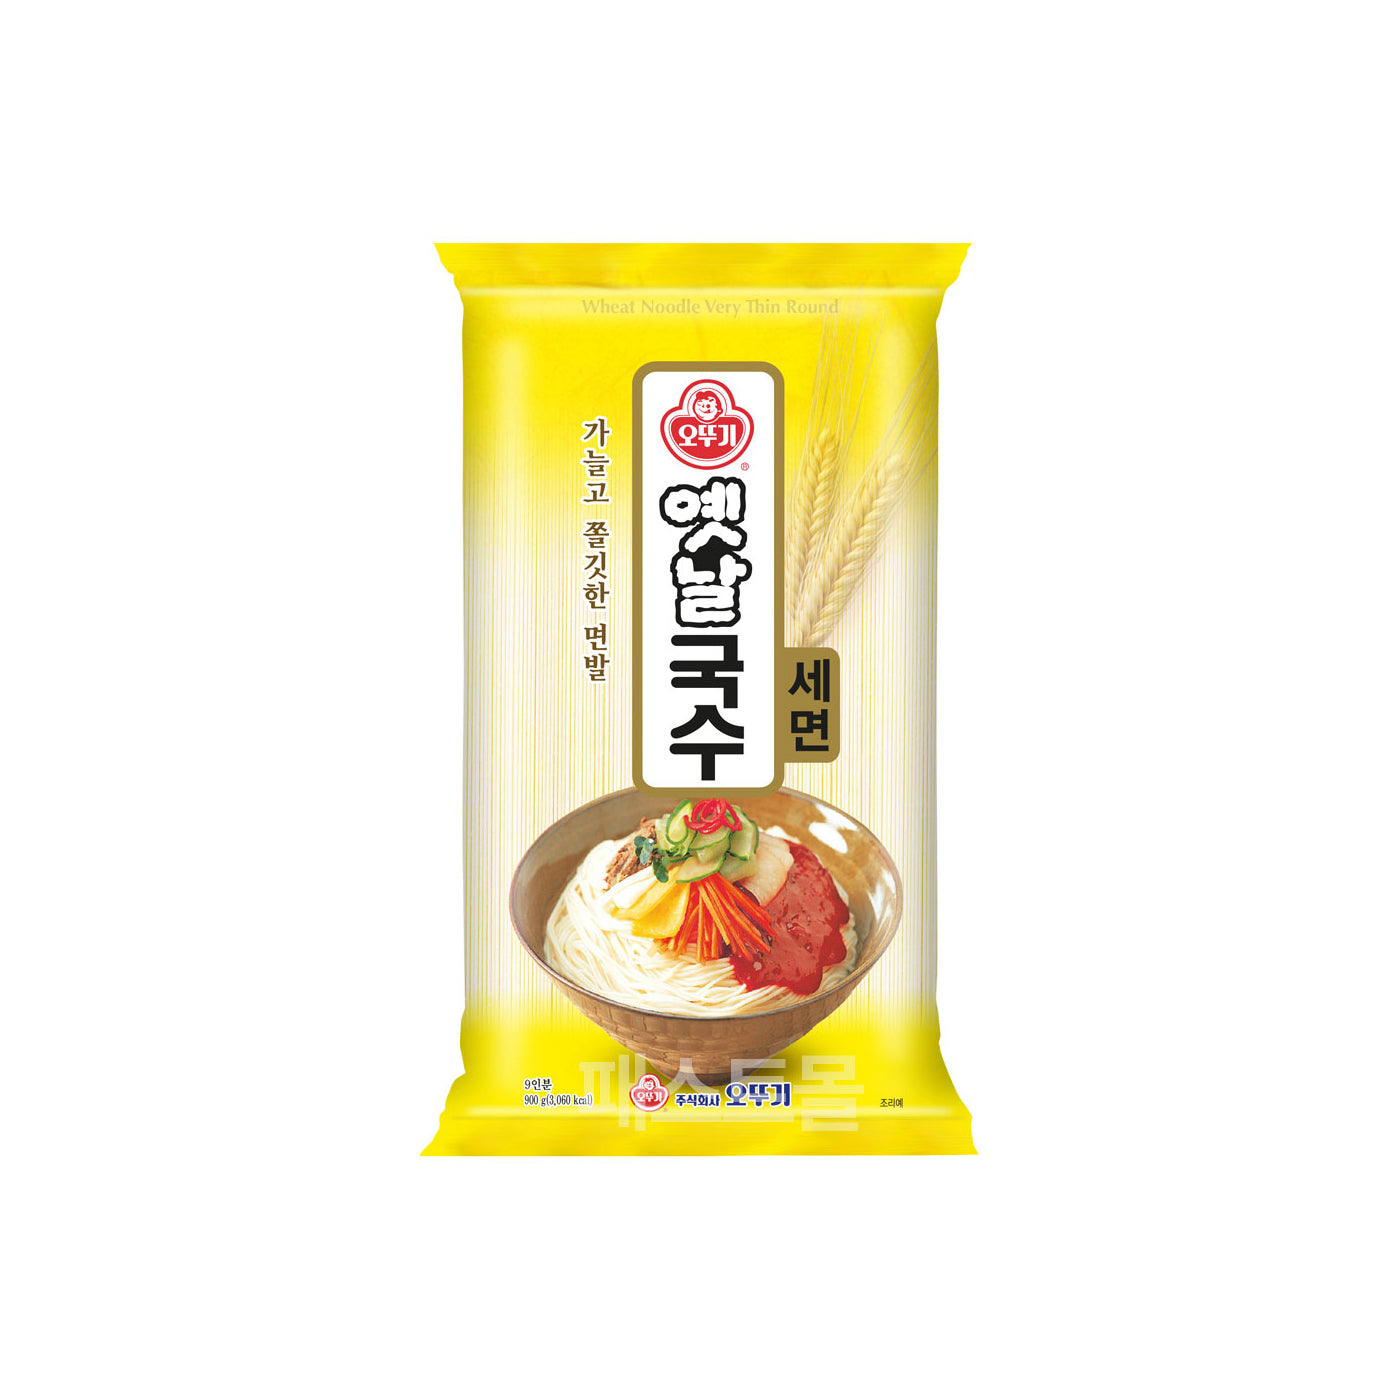 Old Noodle(Thin) 15/900g 옛날 세면900g